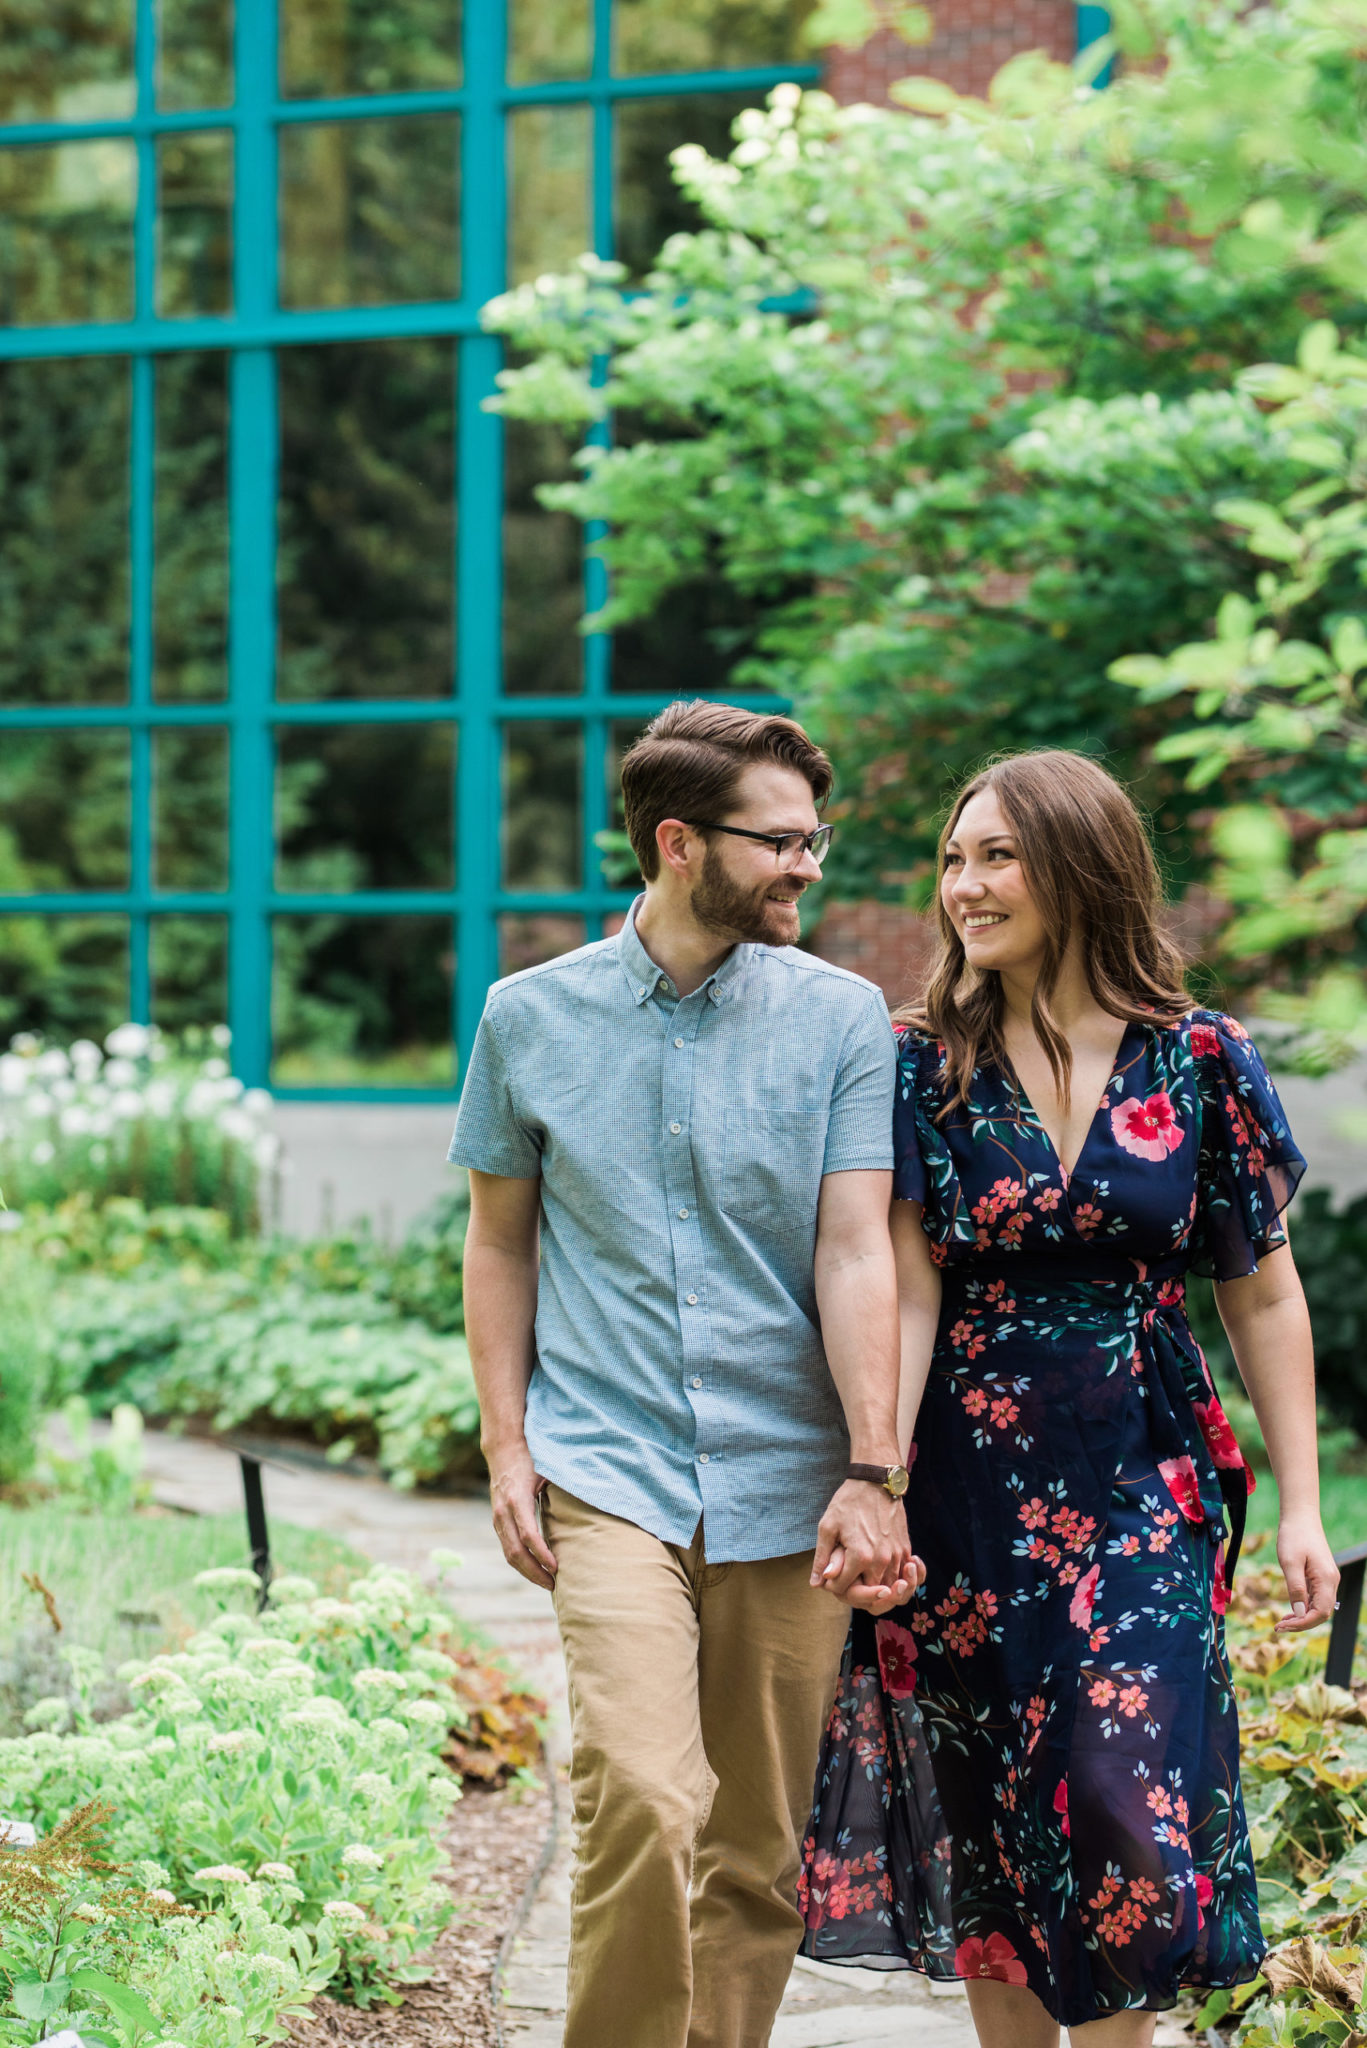 Two people walking and smiling in a vibrant summer garden.